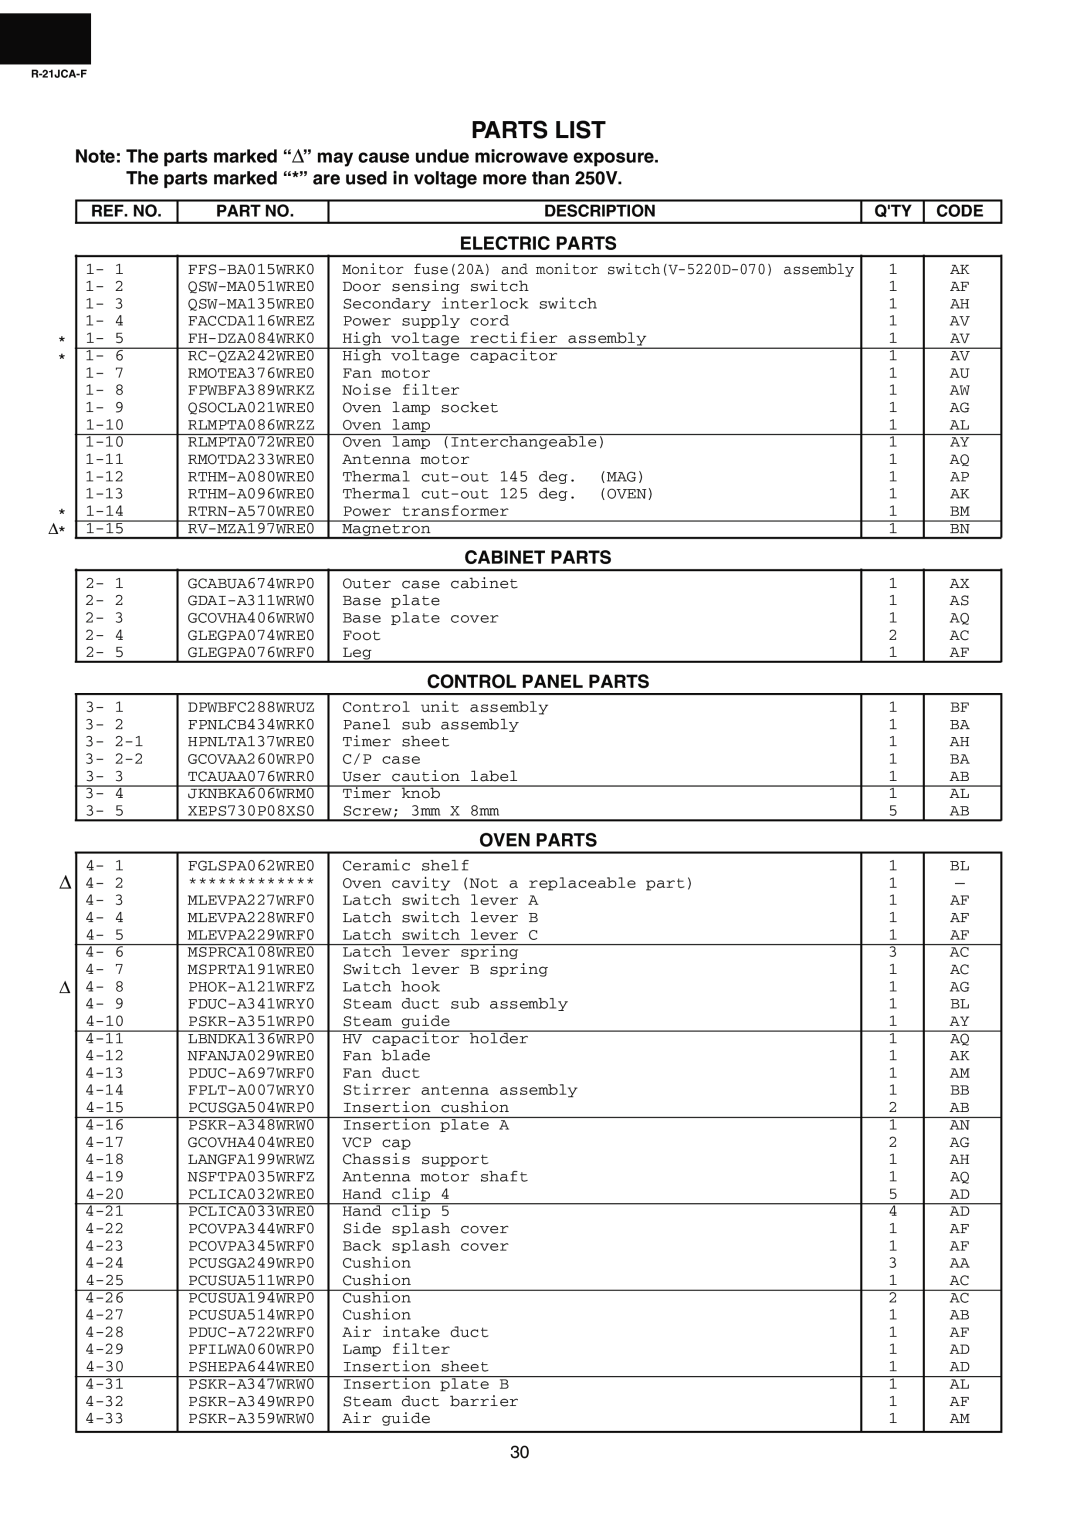 Sharp R-21JCA-F Parts List, Note The parts marked “∆” may cause undue microwave exposure, Electric Parts, Cabinet Parts 